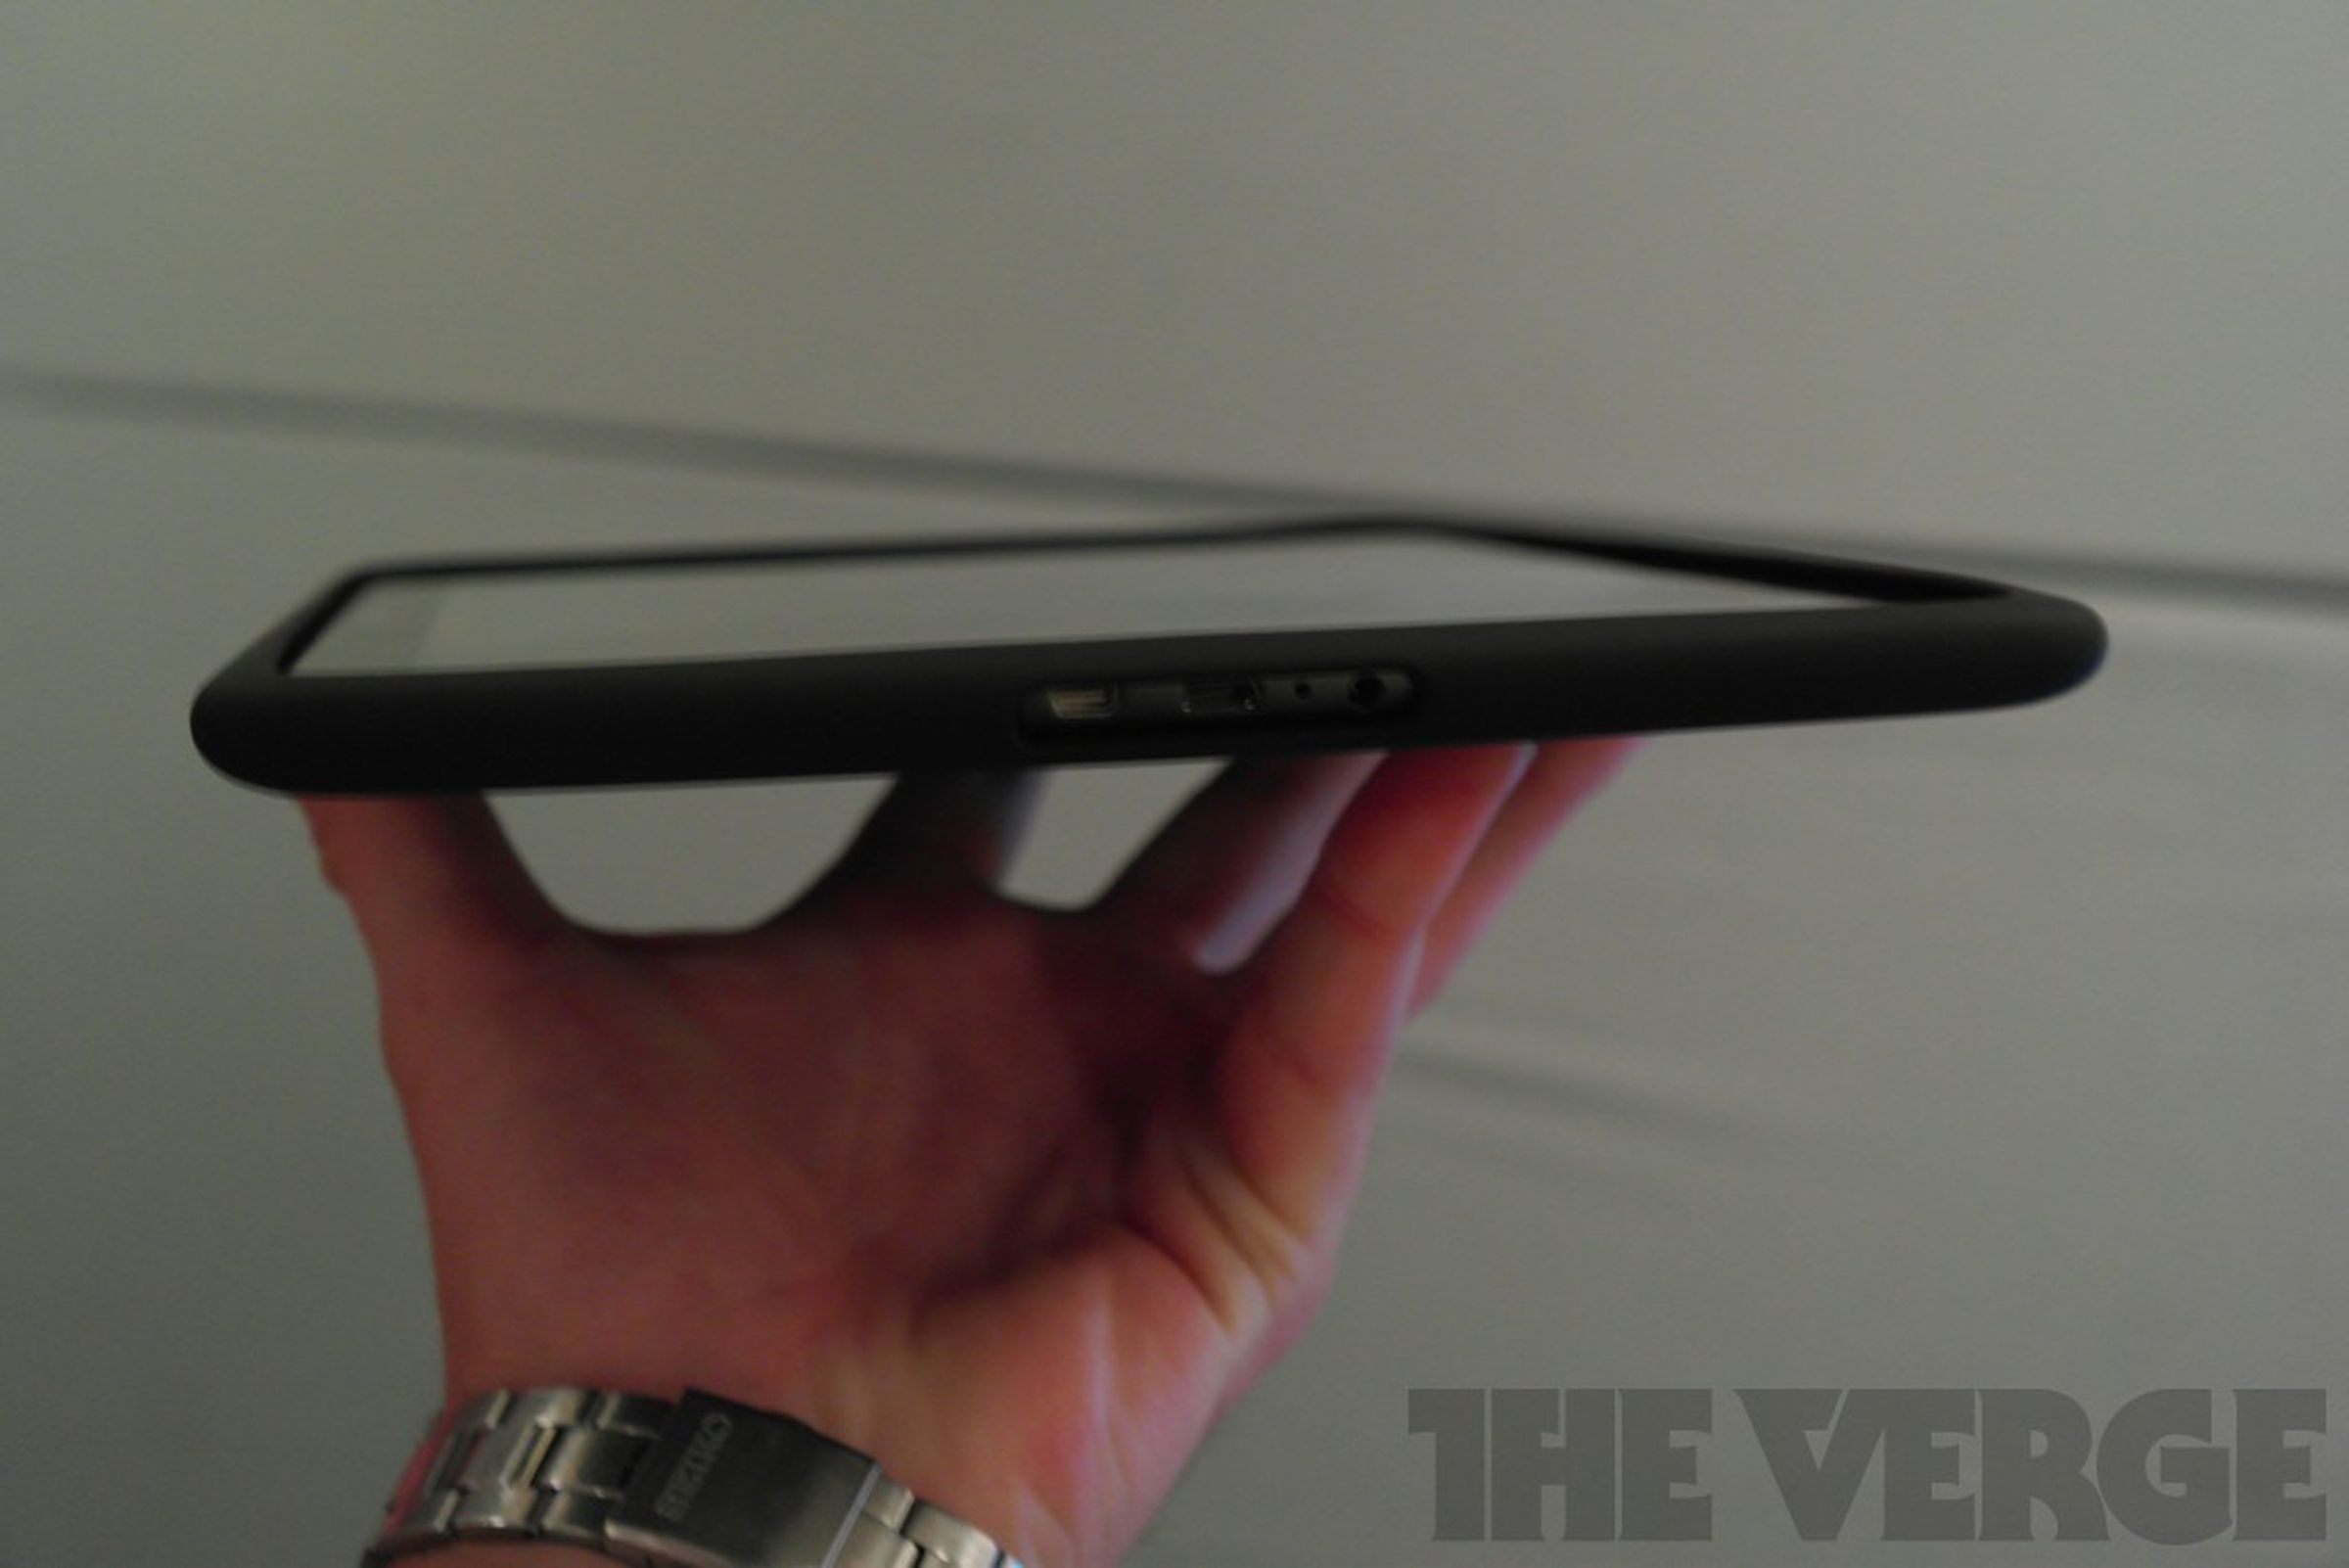 Lenovo IdeaTab S2109 hands-on pictures